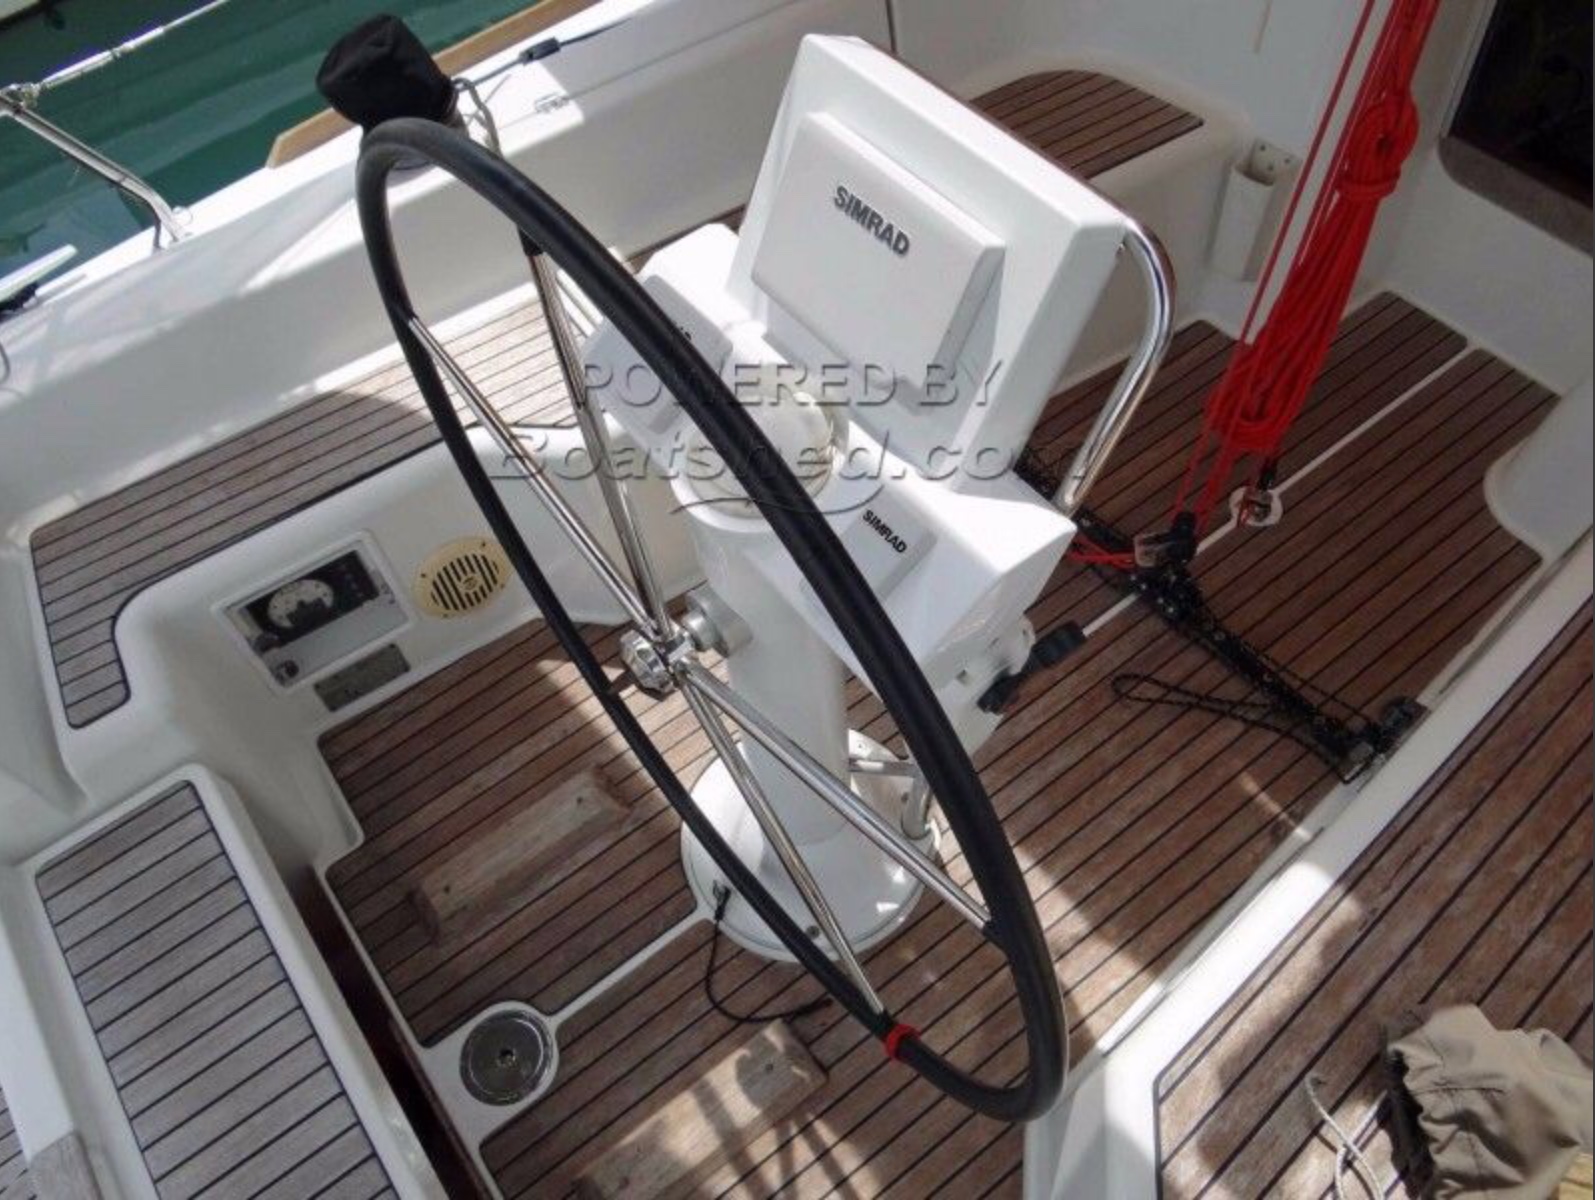 Sun Odyssey 33i - Yacht Charter Koh Chang & Boat hire in Thailand Koh Chang Ao Salak Phet 6